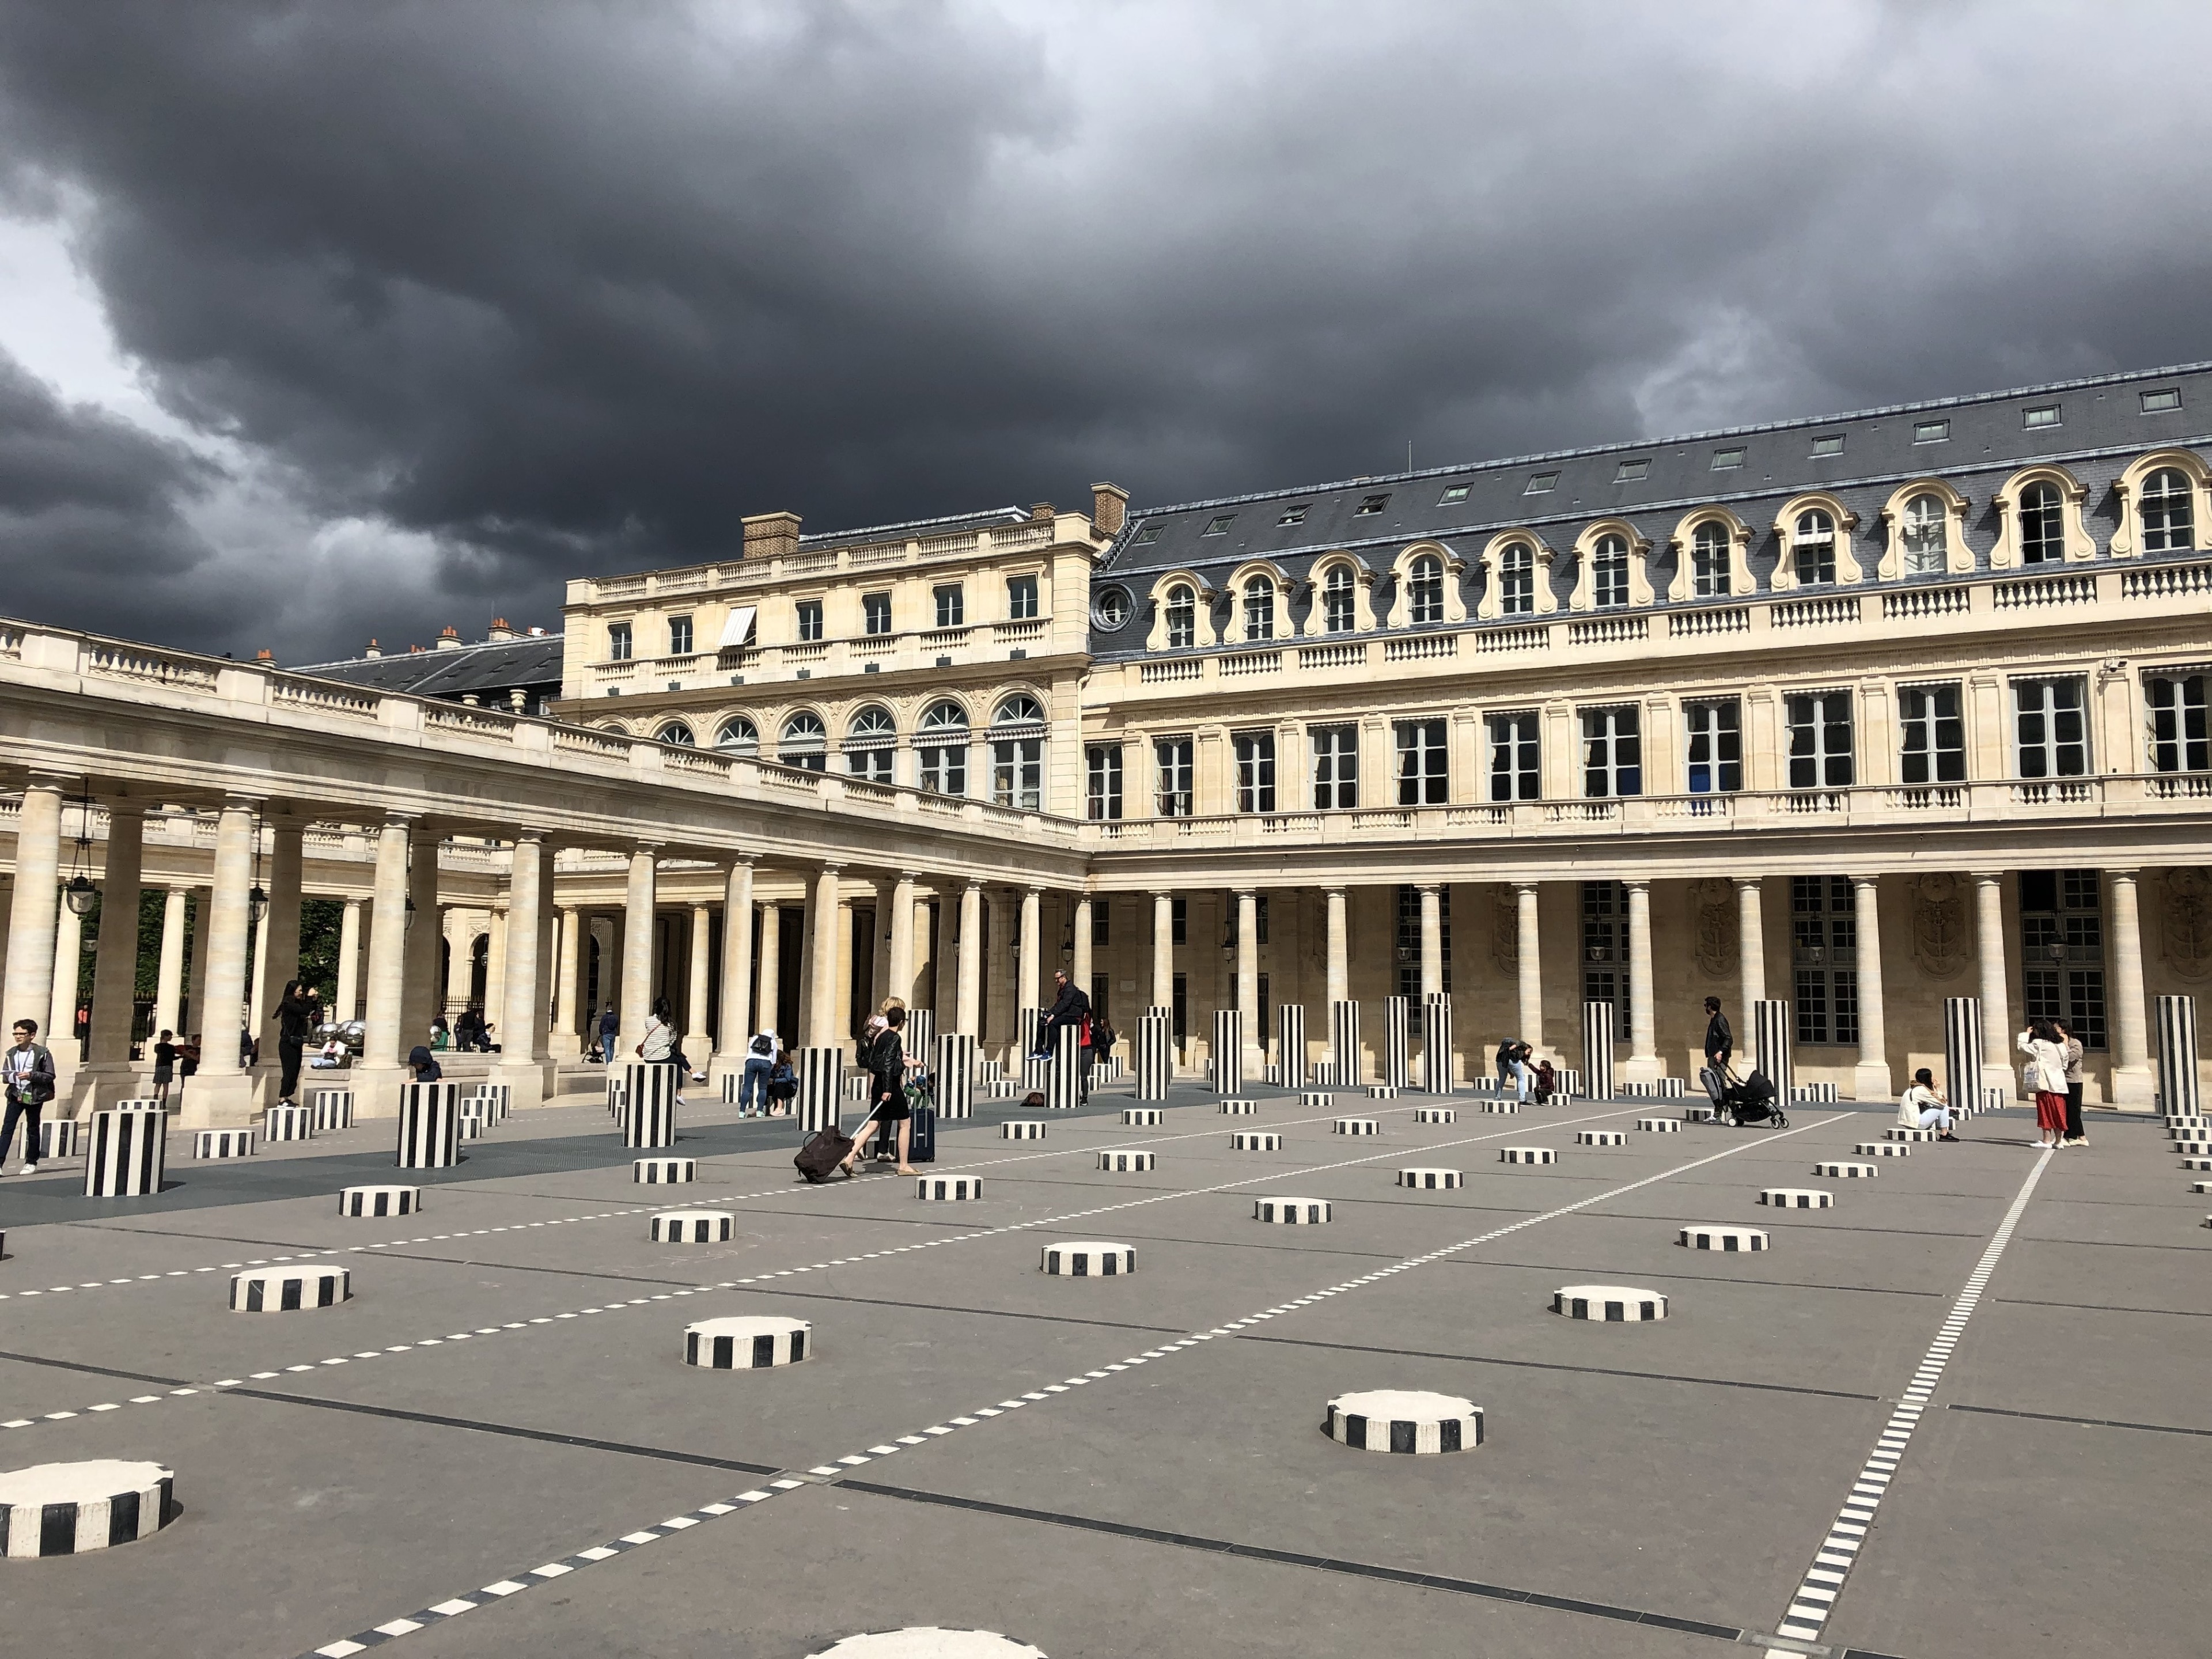 Palais-Royal - Information and Location of the Palace in Paris